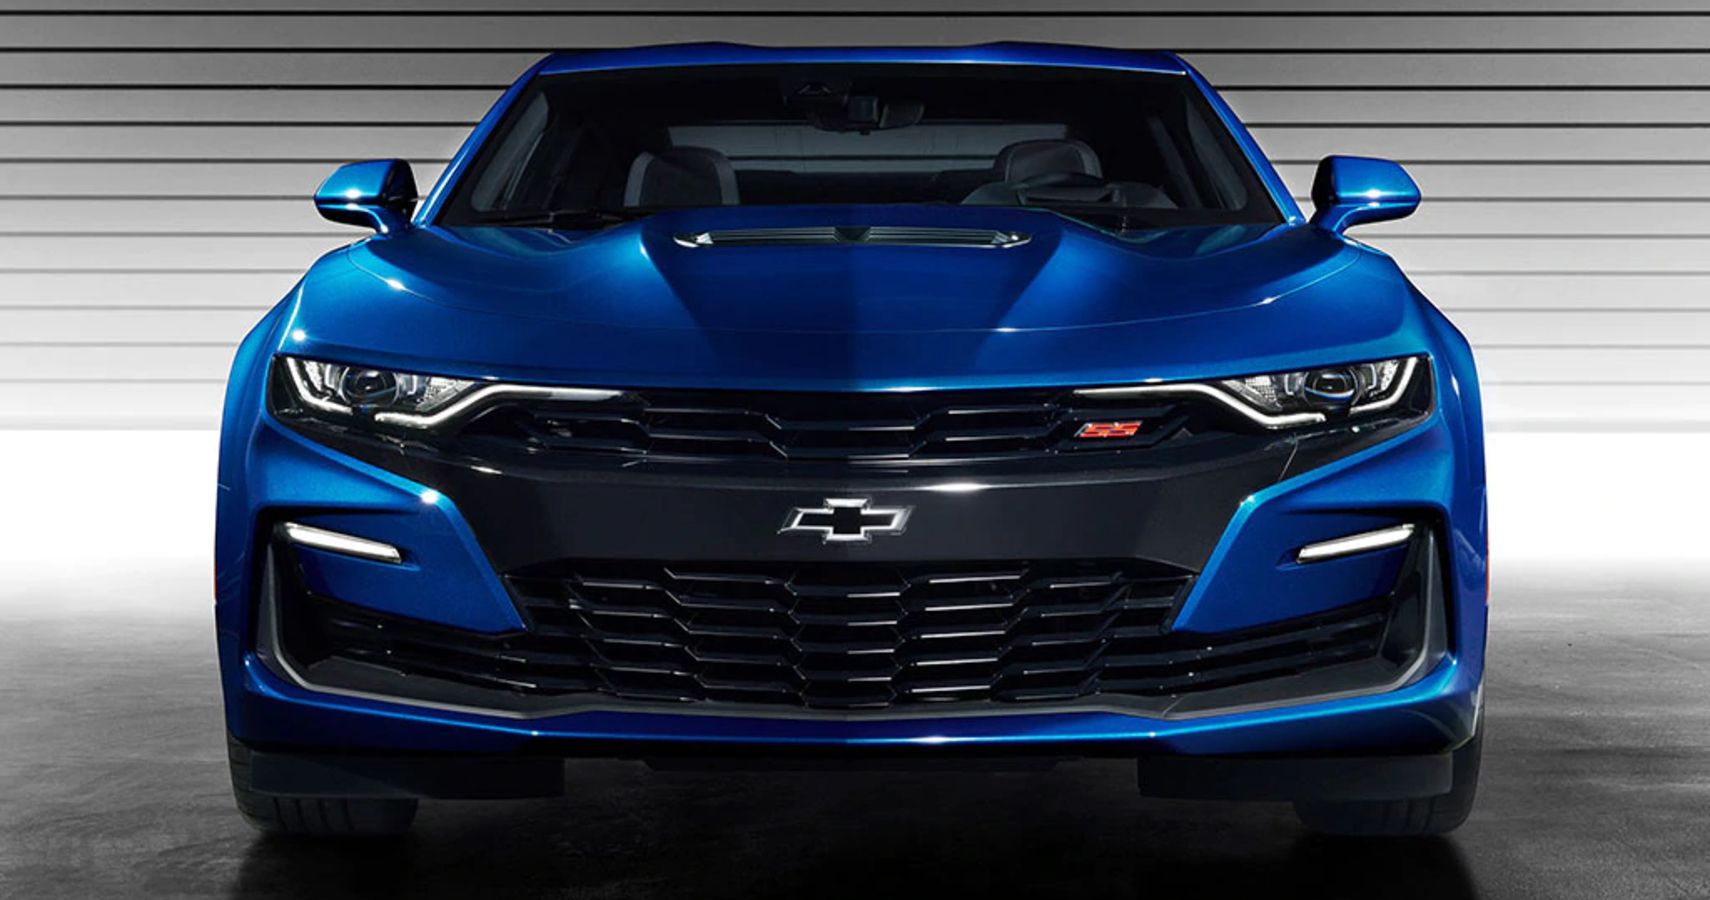 2021 Chevy Camaro Gets Three New Appearance Packages | HotCars